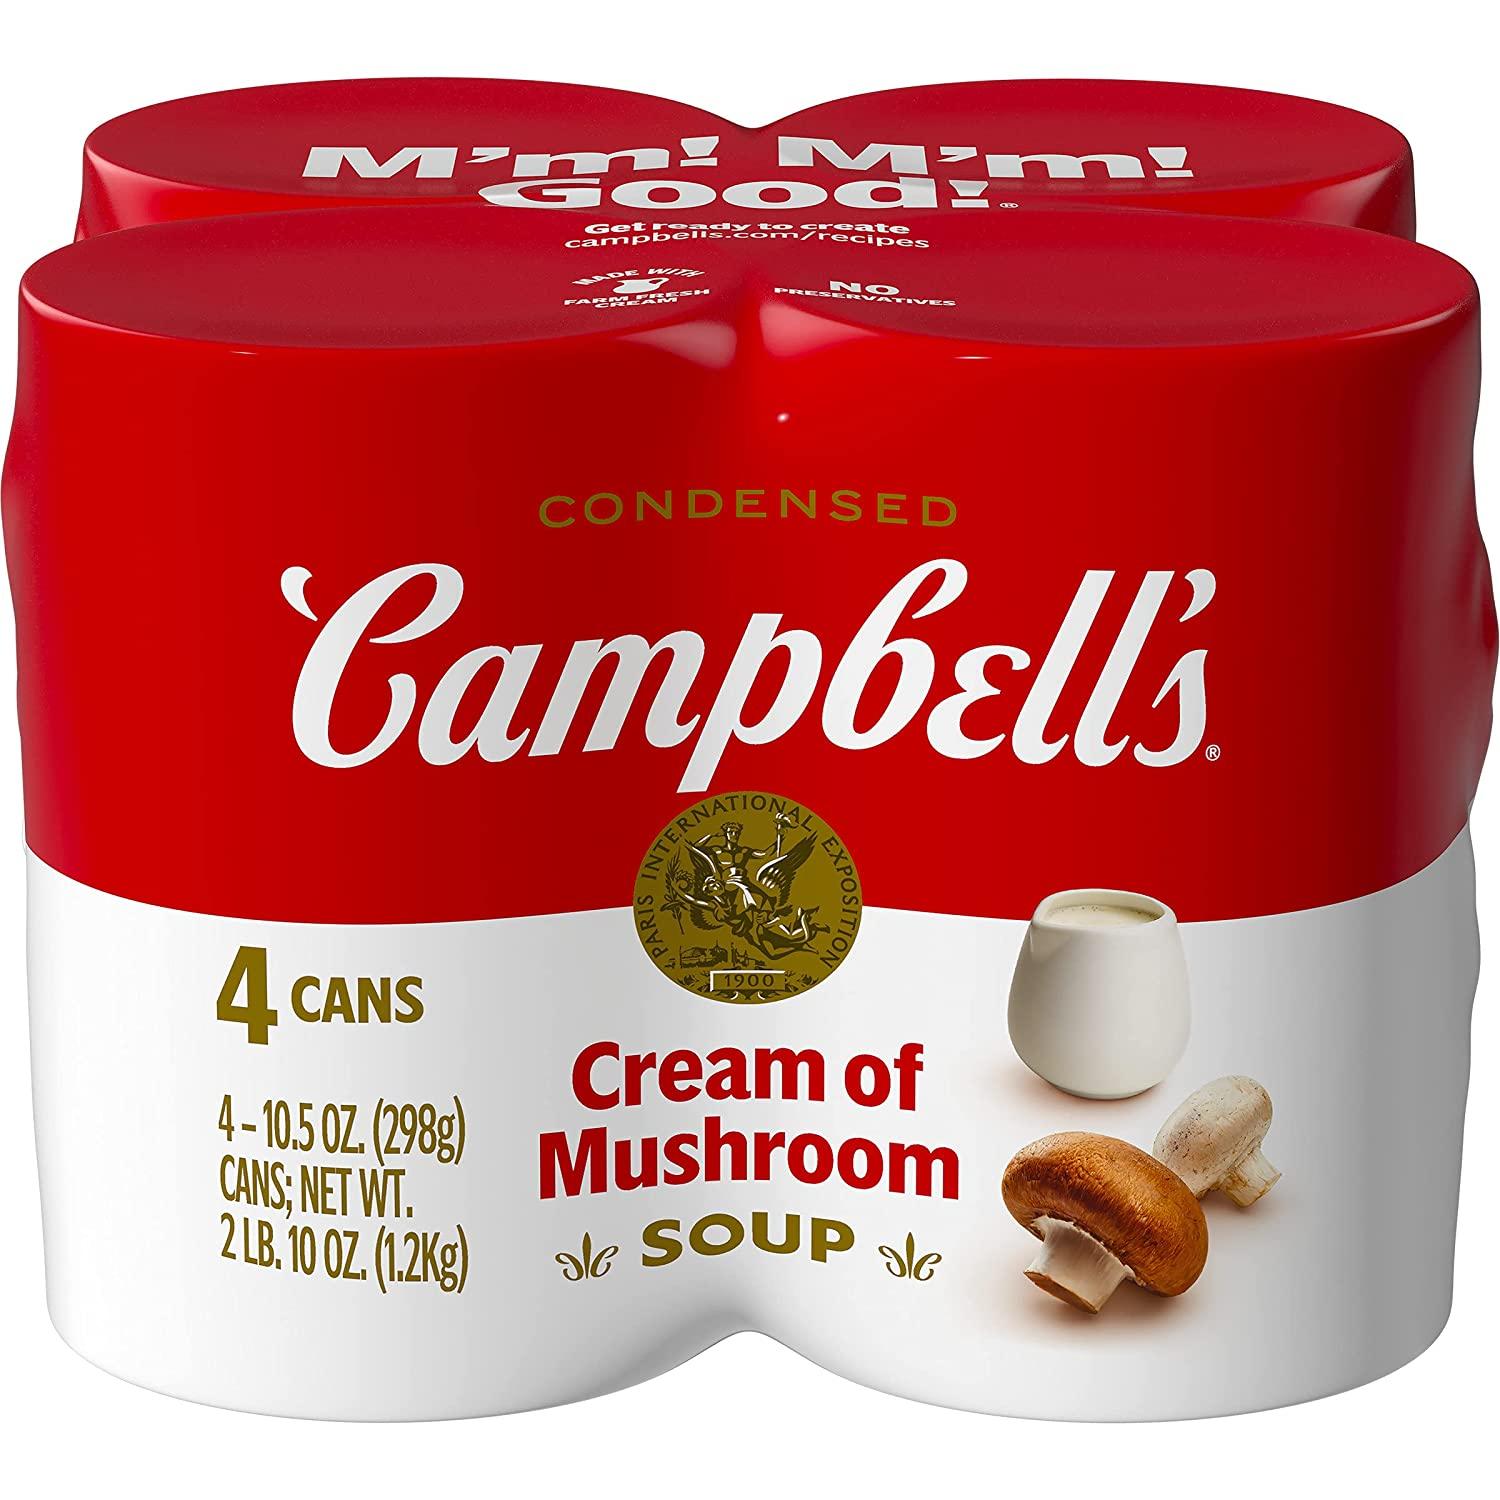 Campbells Condensed Cream of Mushroom Soup 4 Cans for $3.40 Shipped